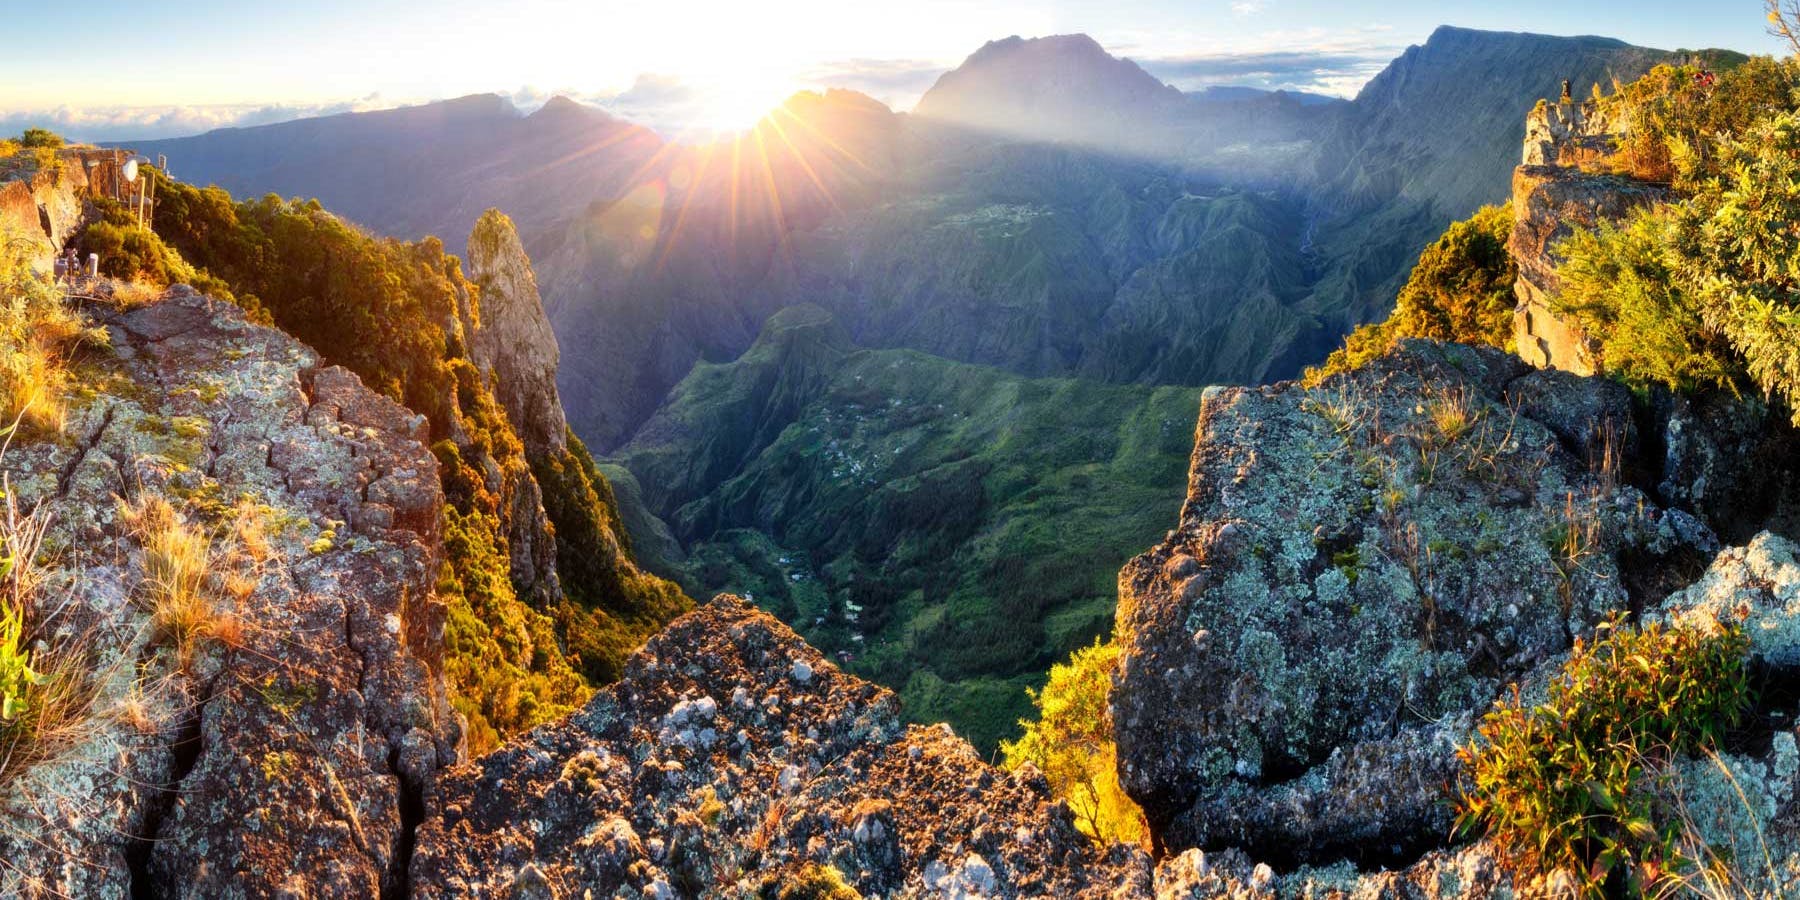 Private hiking tours on Reunion Island